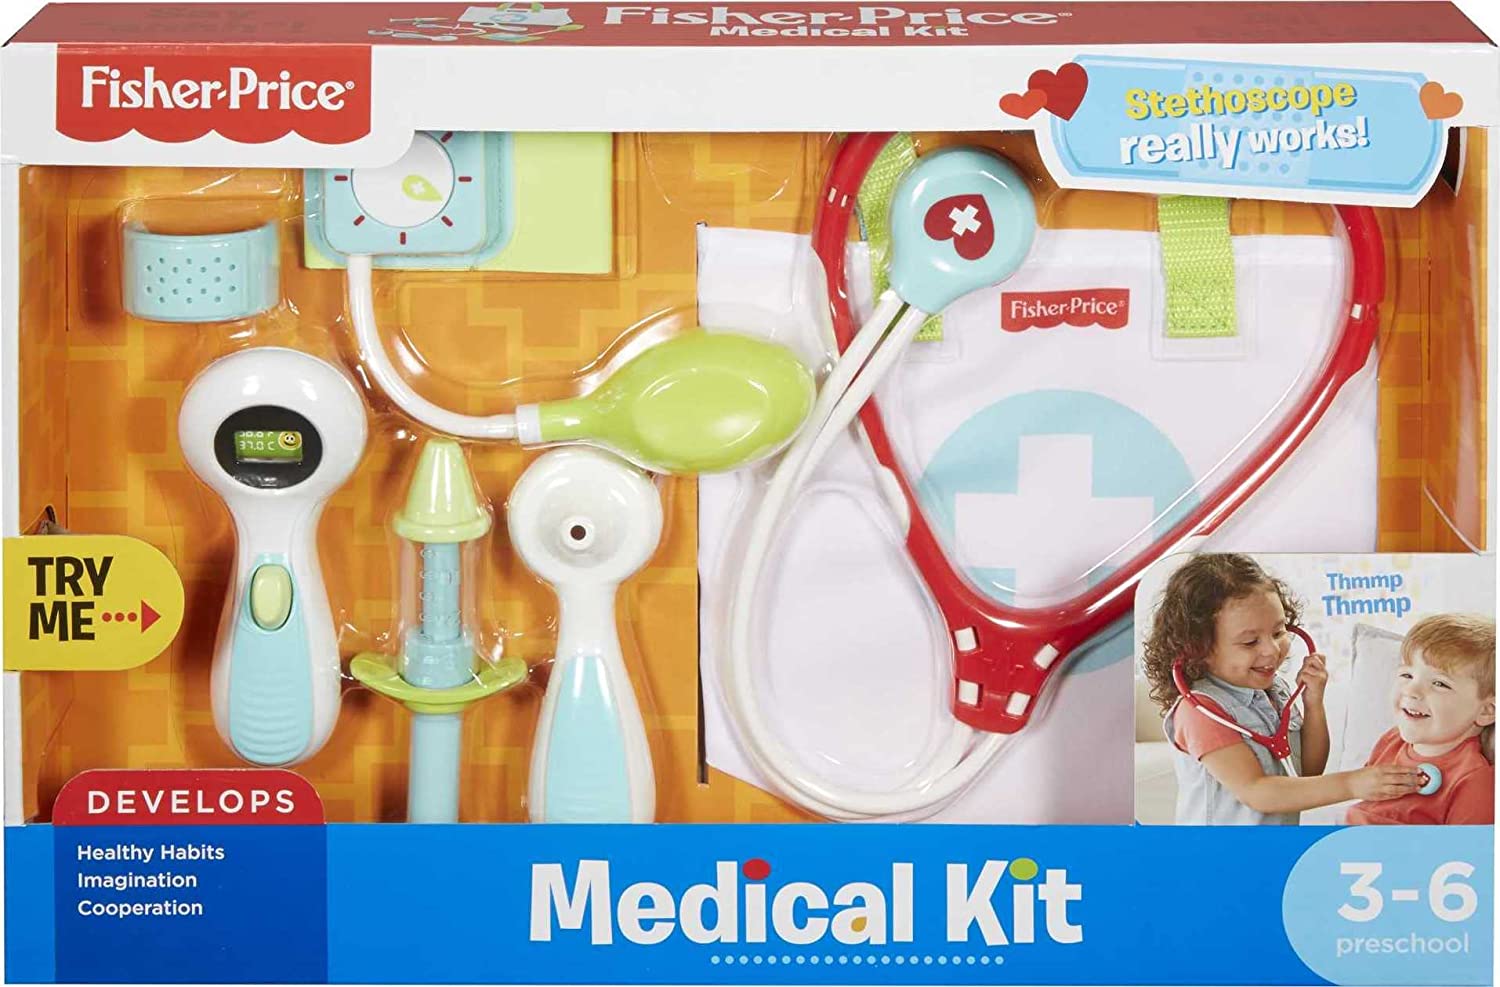 Fisher-Price Medical Kit, 7-Piece Pretend Play Set , White - for Preschoolers Ages 3-6 Years